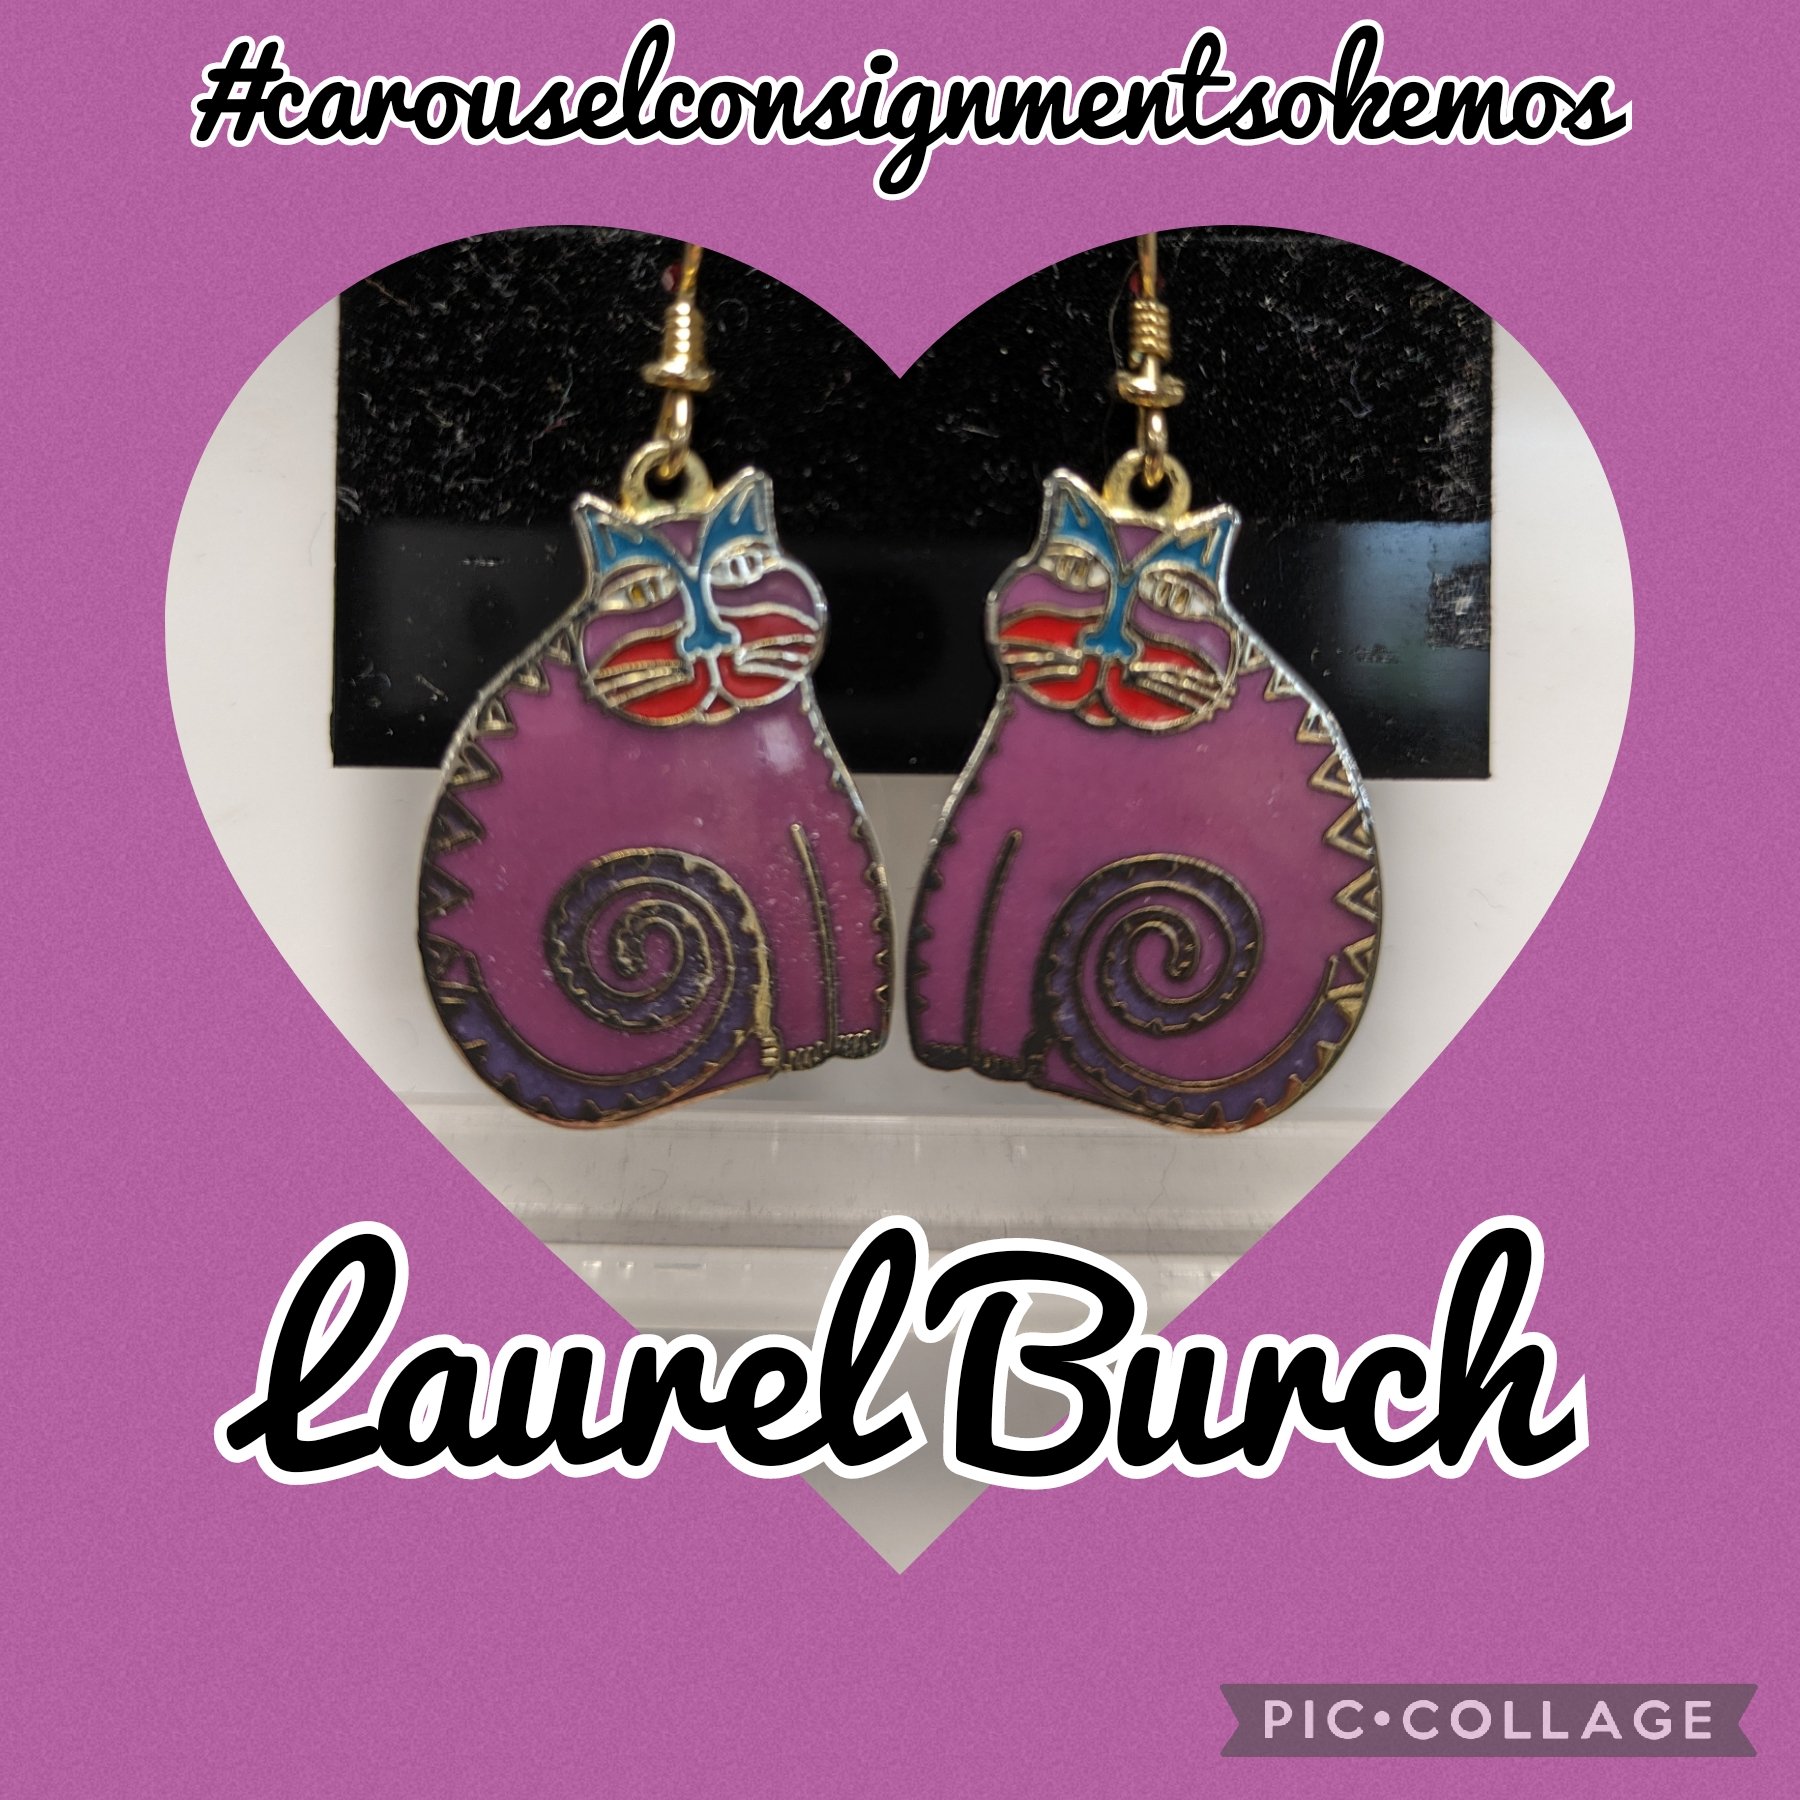 🩷Laurel Burch🩷
Cat Earrings $38
#carouselconsignmentsokemos #shoplocal #shopsmall #shopsmallbusiness #resalenotretail #shopconsignment #shopsecondhand #prelovedclothing #okemos #sustainablefashion #laurelburch #cat #earrings #ootd